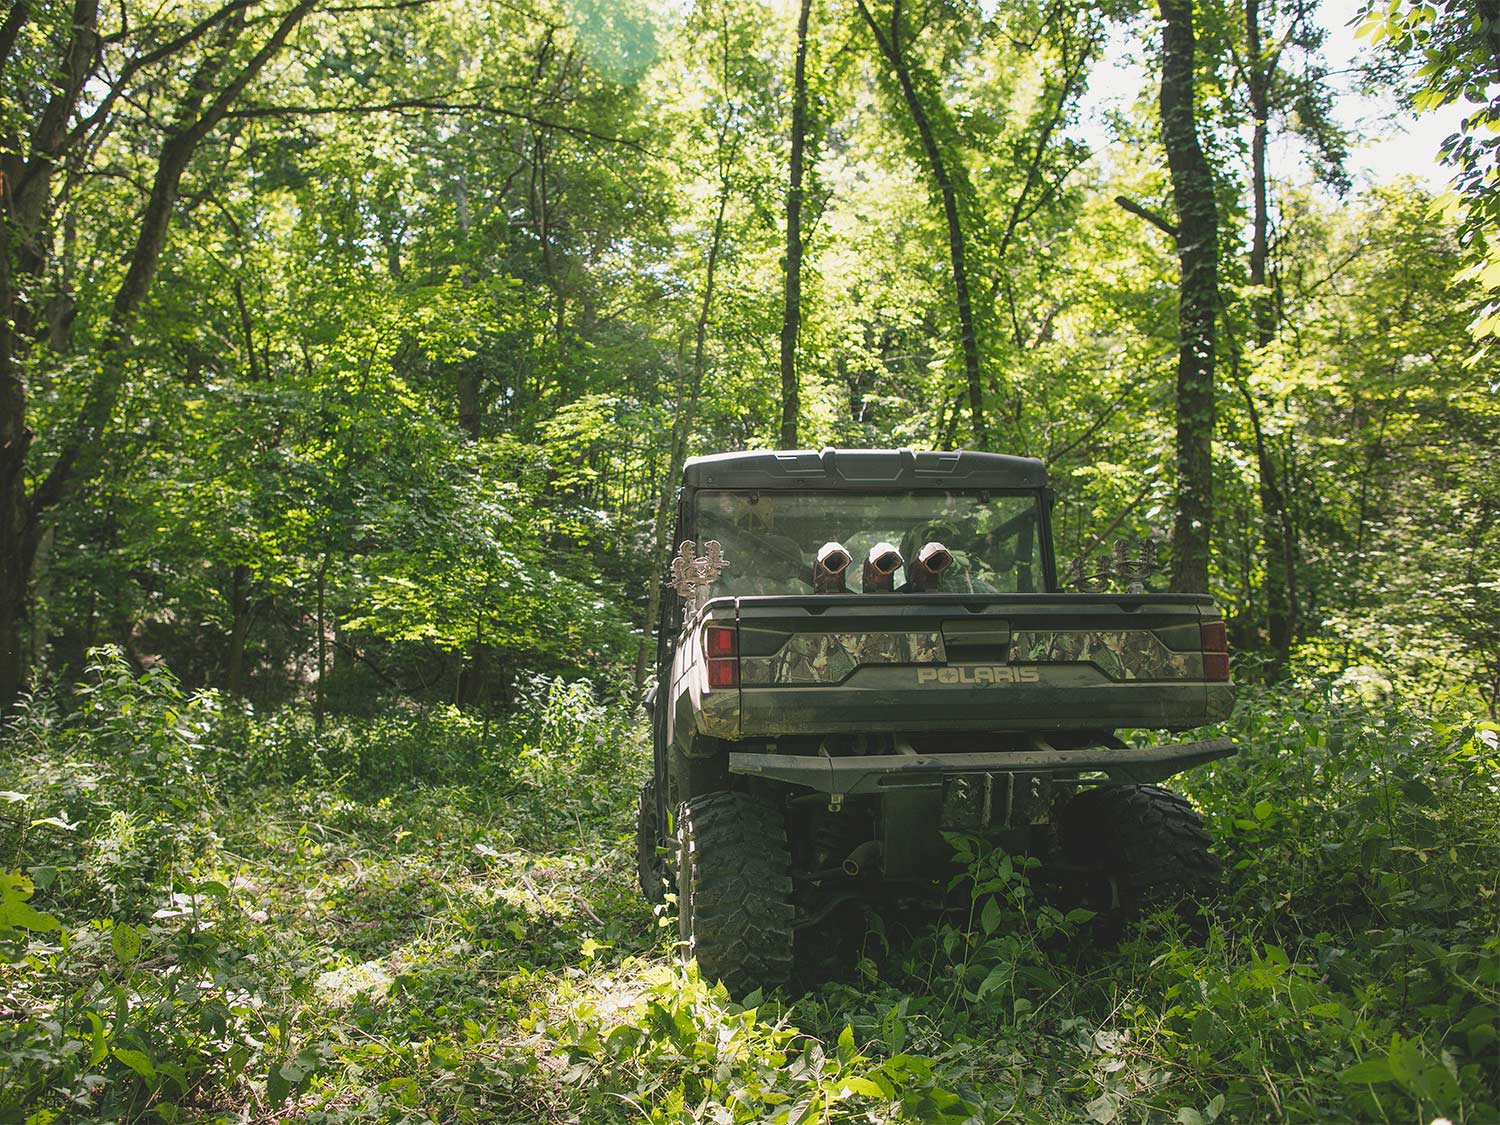 a polaris ranger in a wooded area